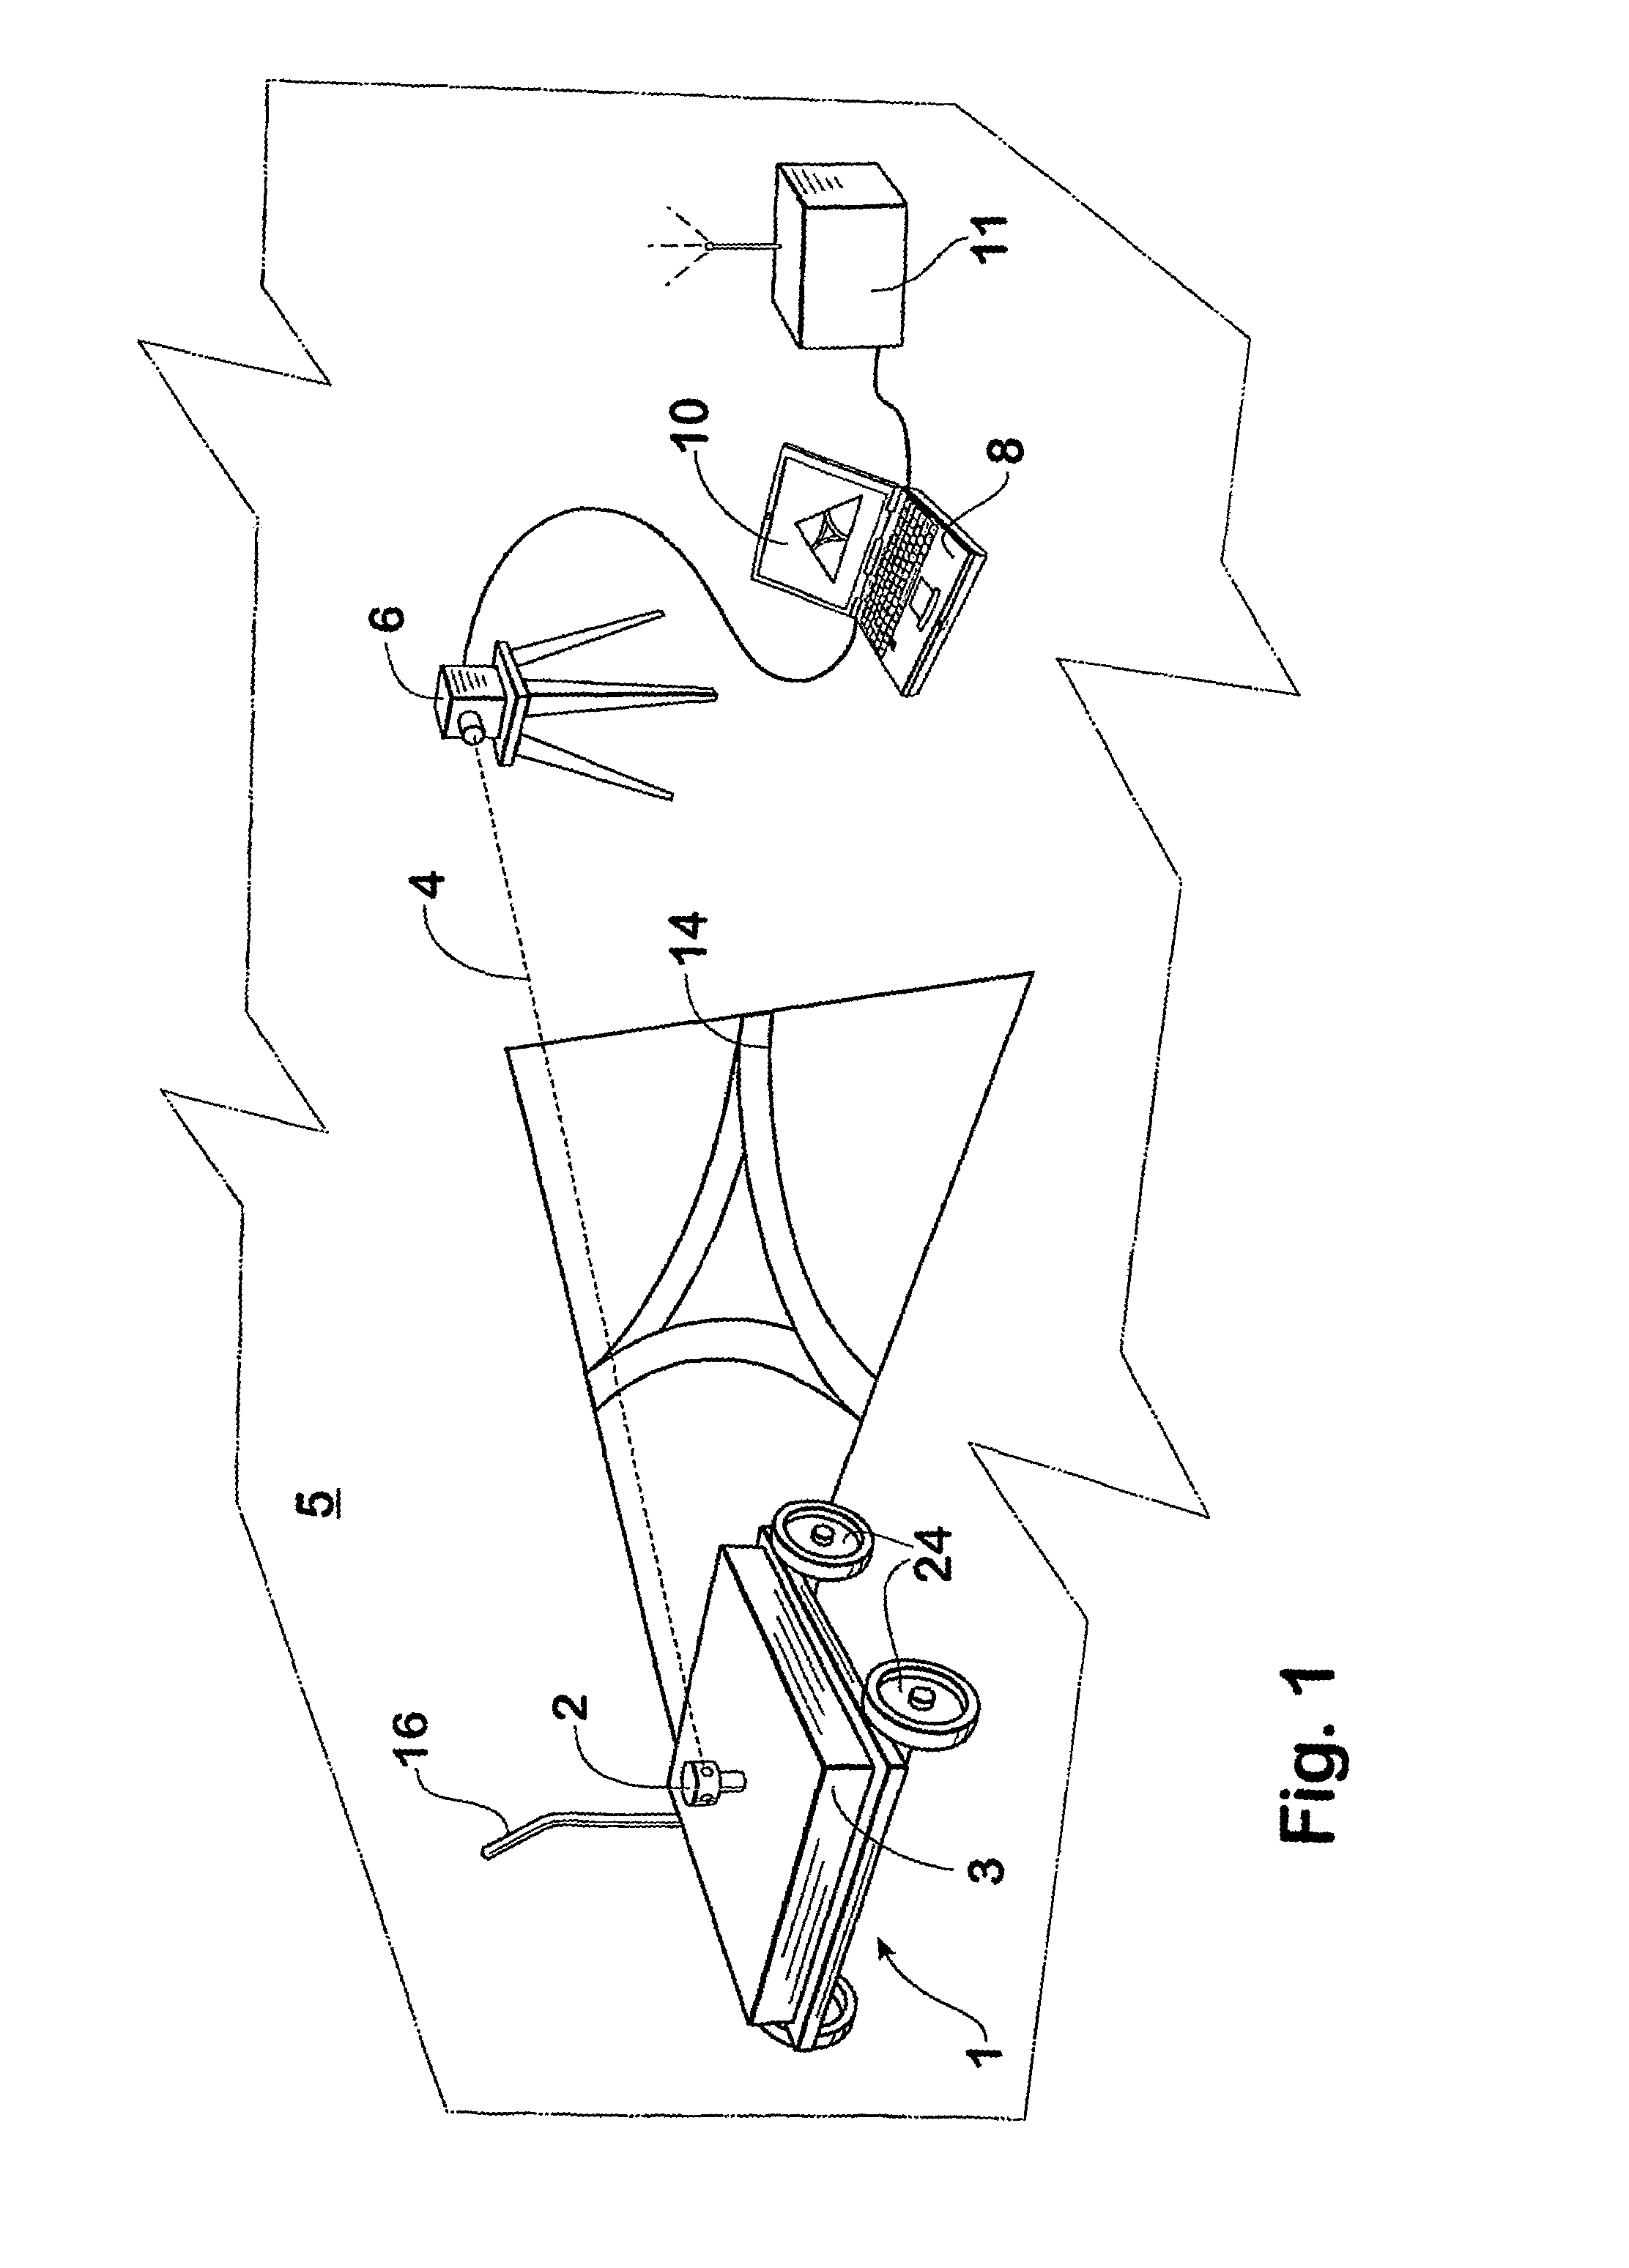 Automatic ground marking method and apparatus